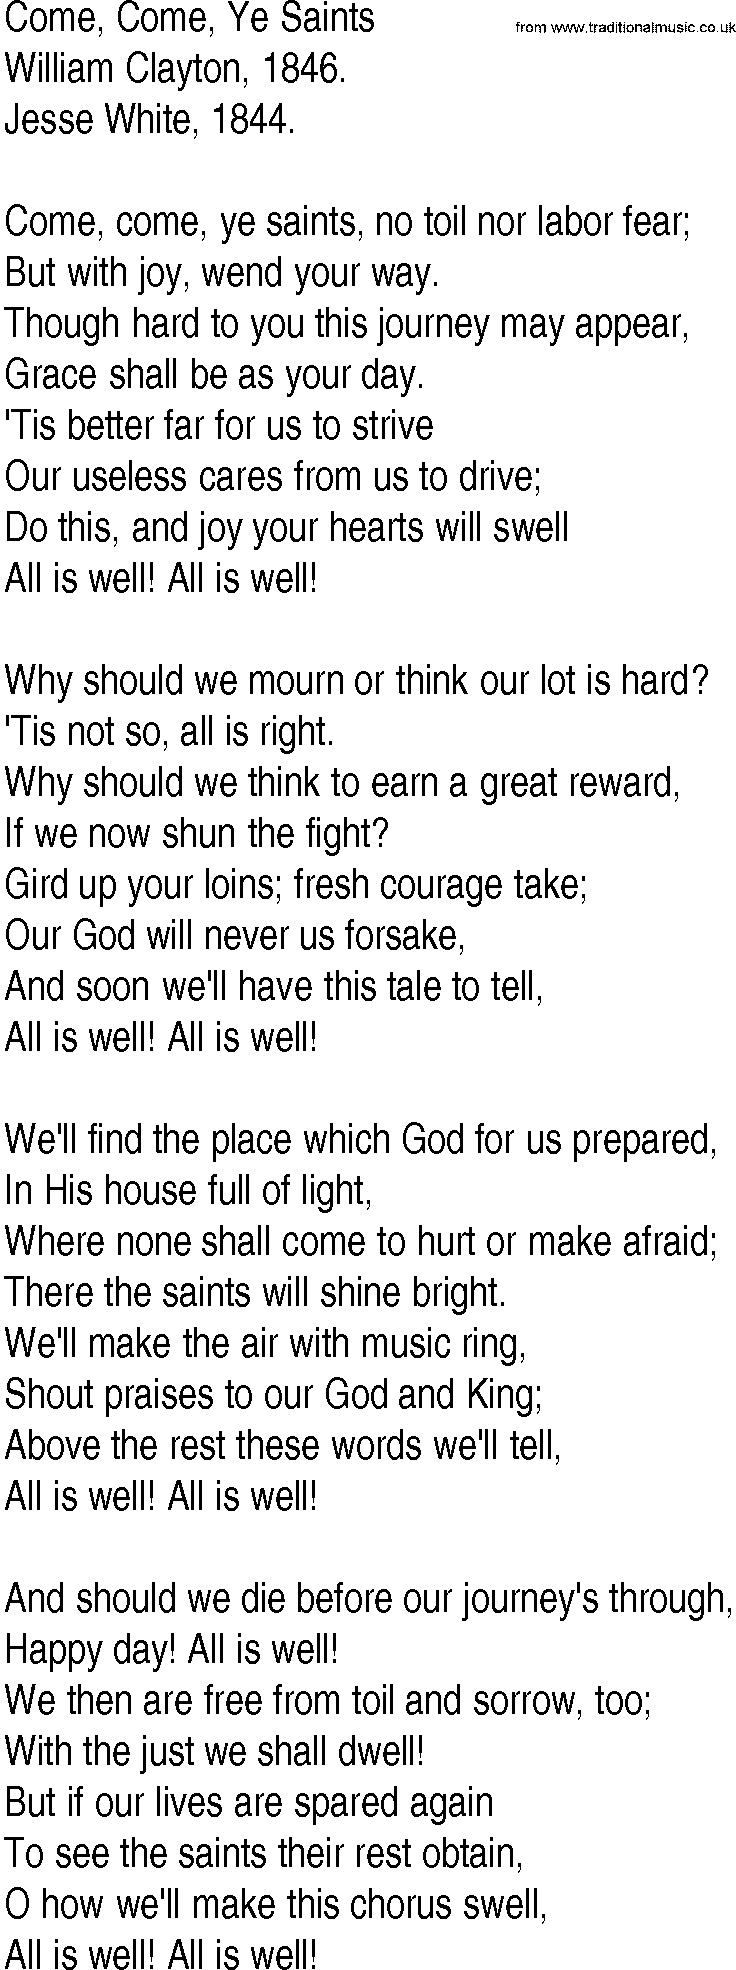 Hymn and Gospel Song: Come, Come, Ye Saints by William Clayton lyrics